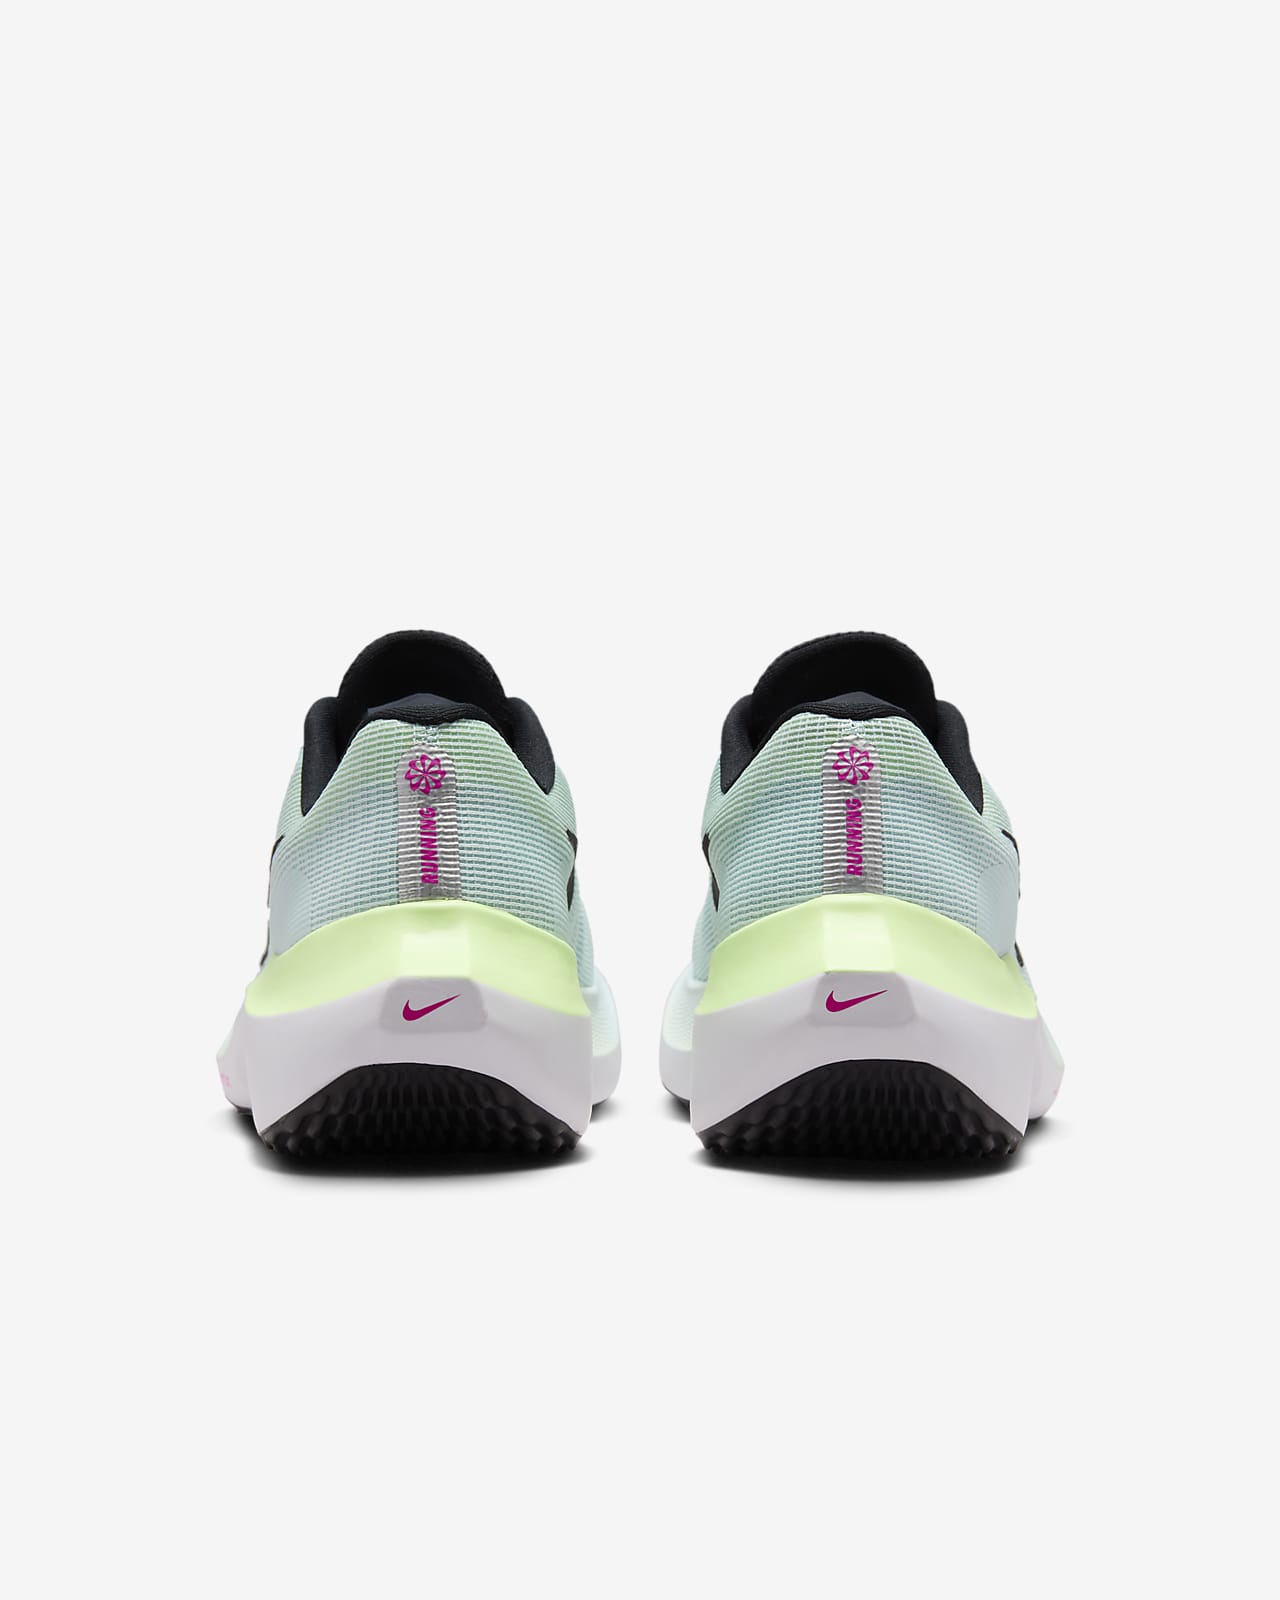 Levitate 6 Woman's Shoes, Women's Road Running Shoes